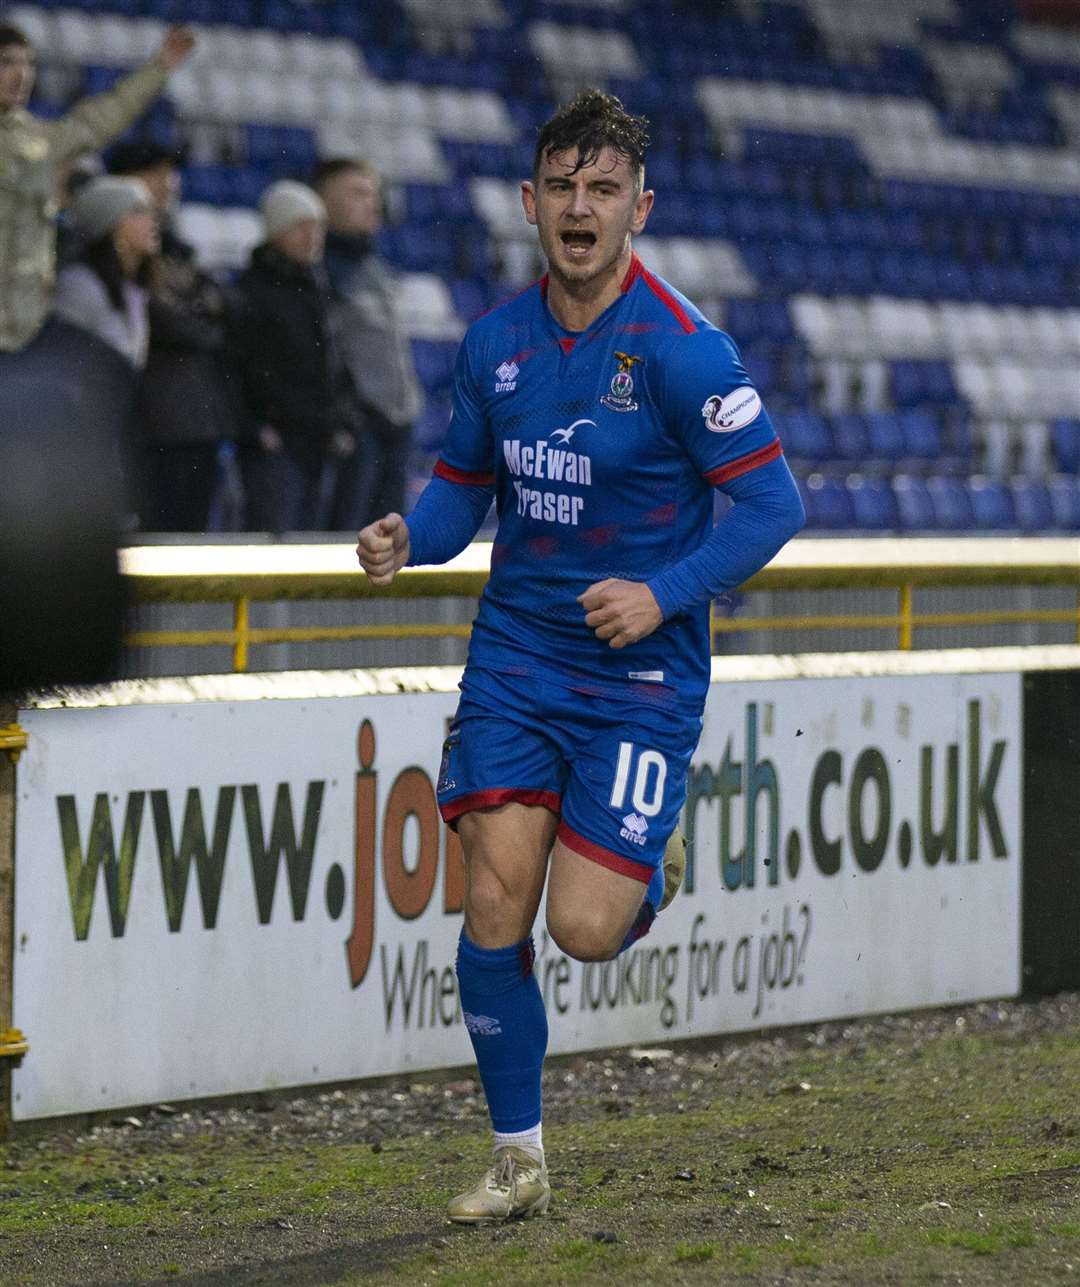 Picture - Ken Macpherson, Inverness. Inverness CT(1) v Dundee(0). 23.11.19. ICT's Aaron Doran celebrates his goal.